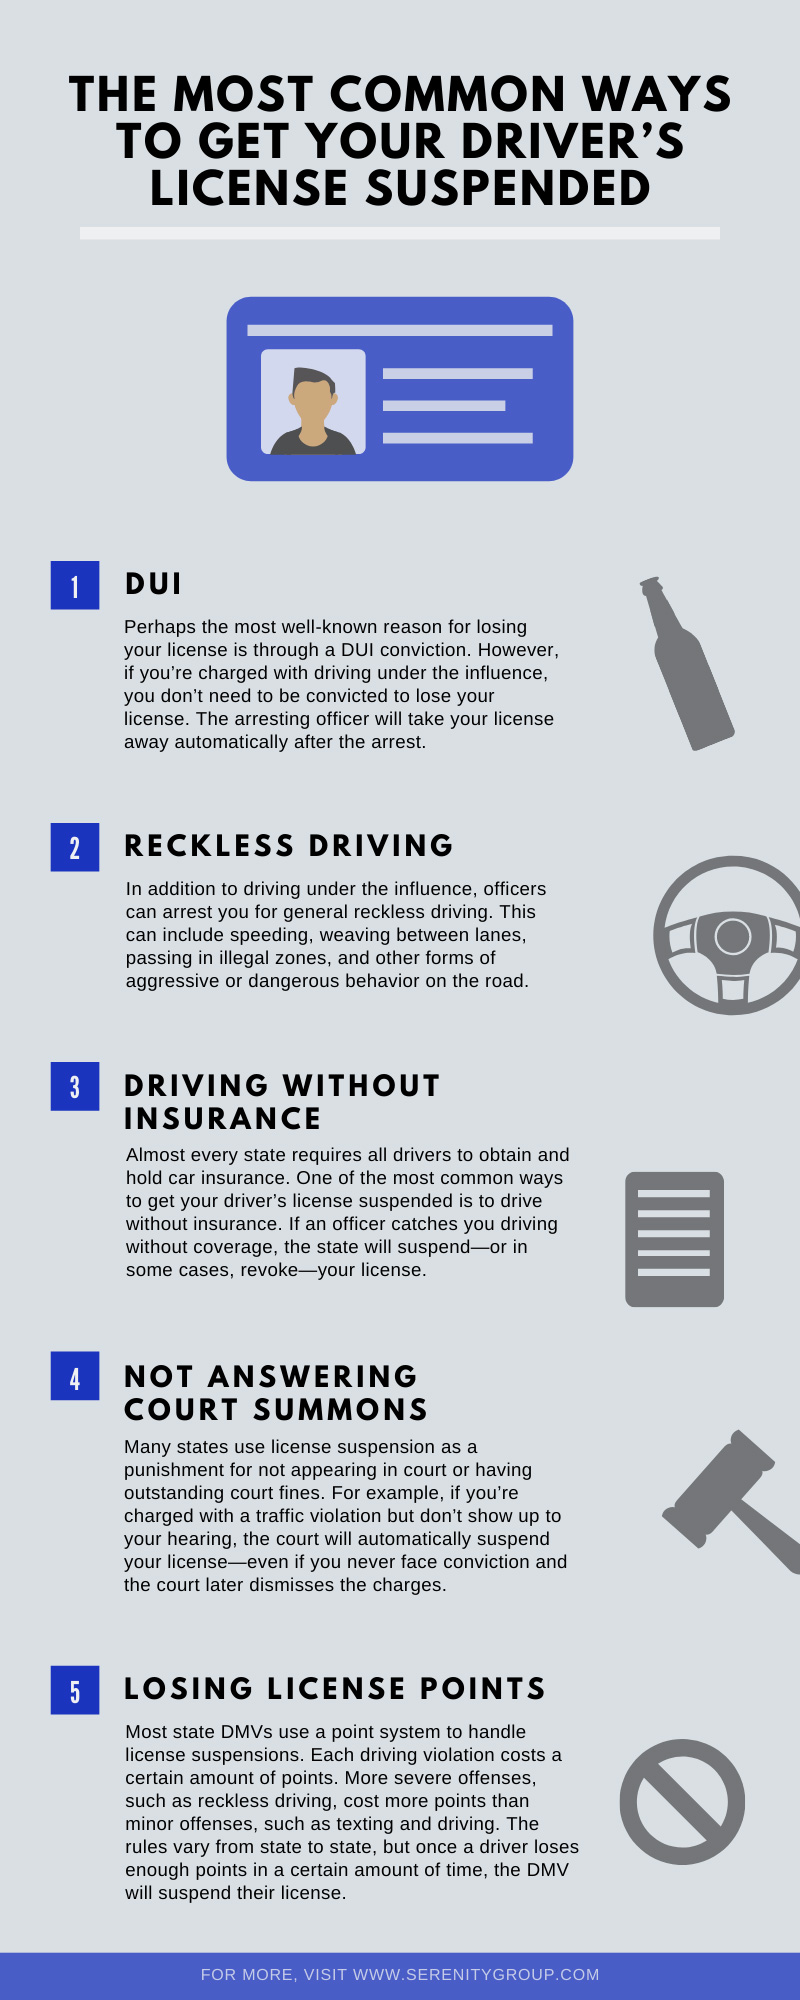 Common Ways to Get Your Driver’s License Suspended